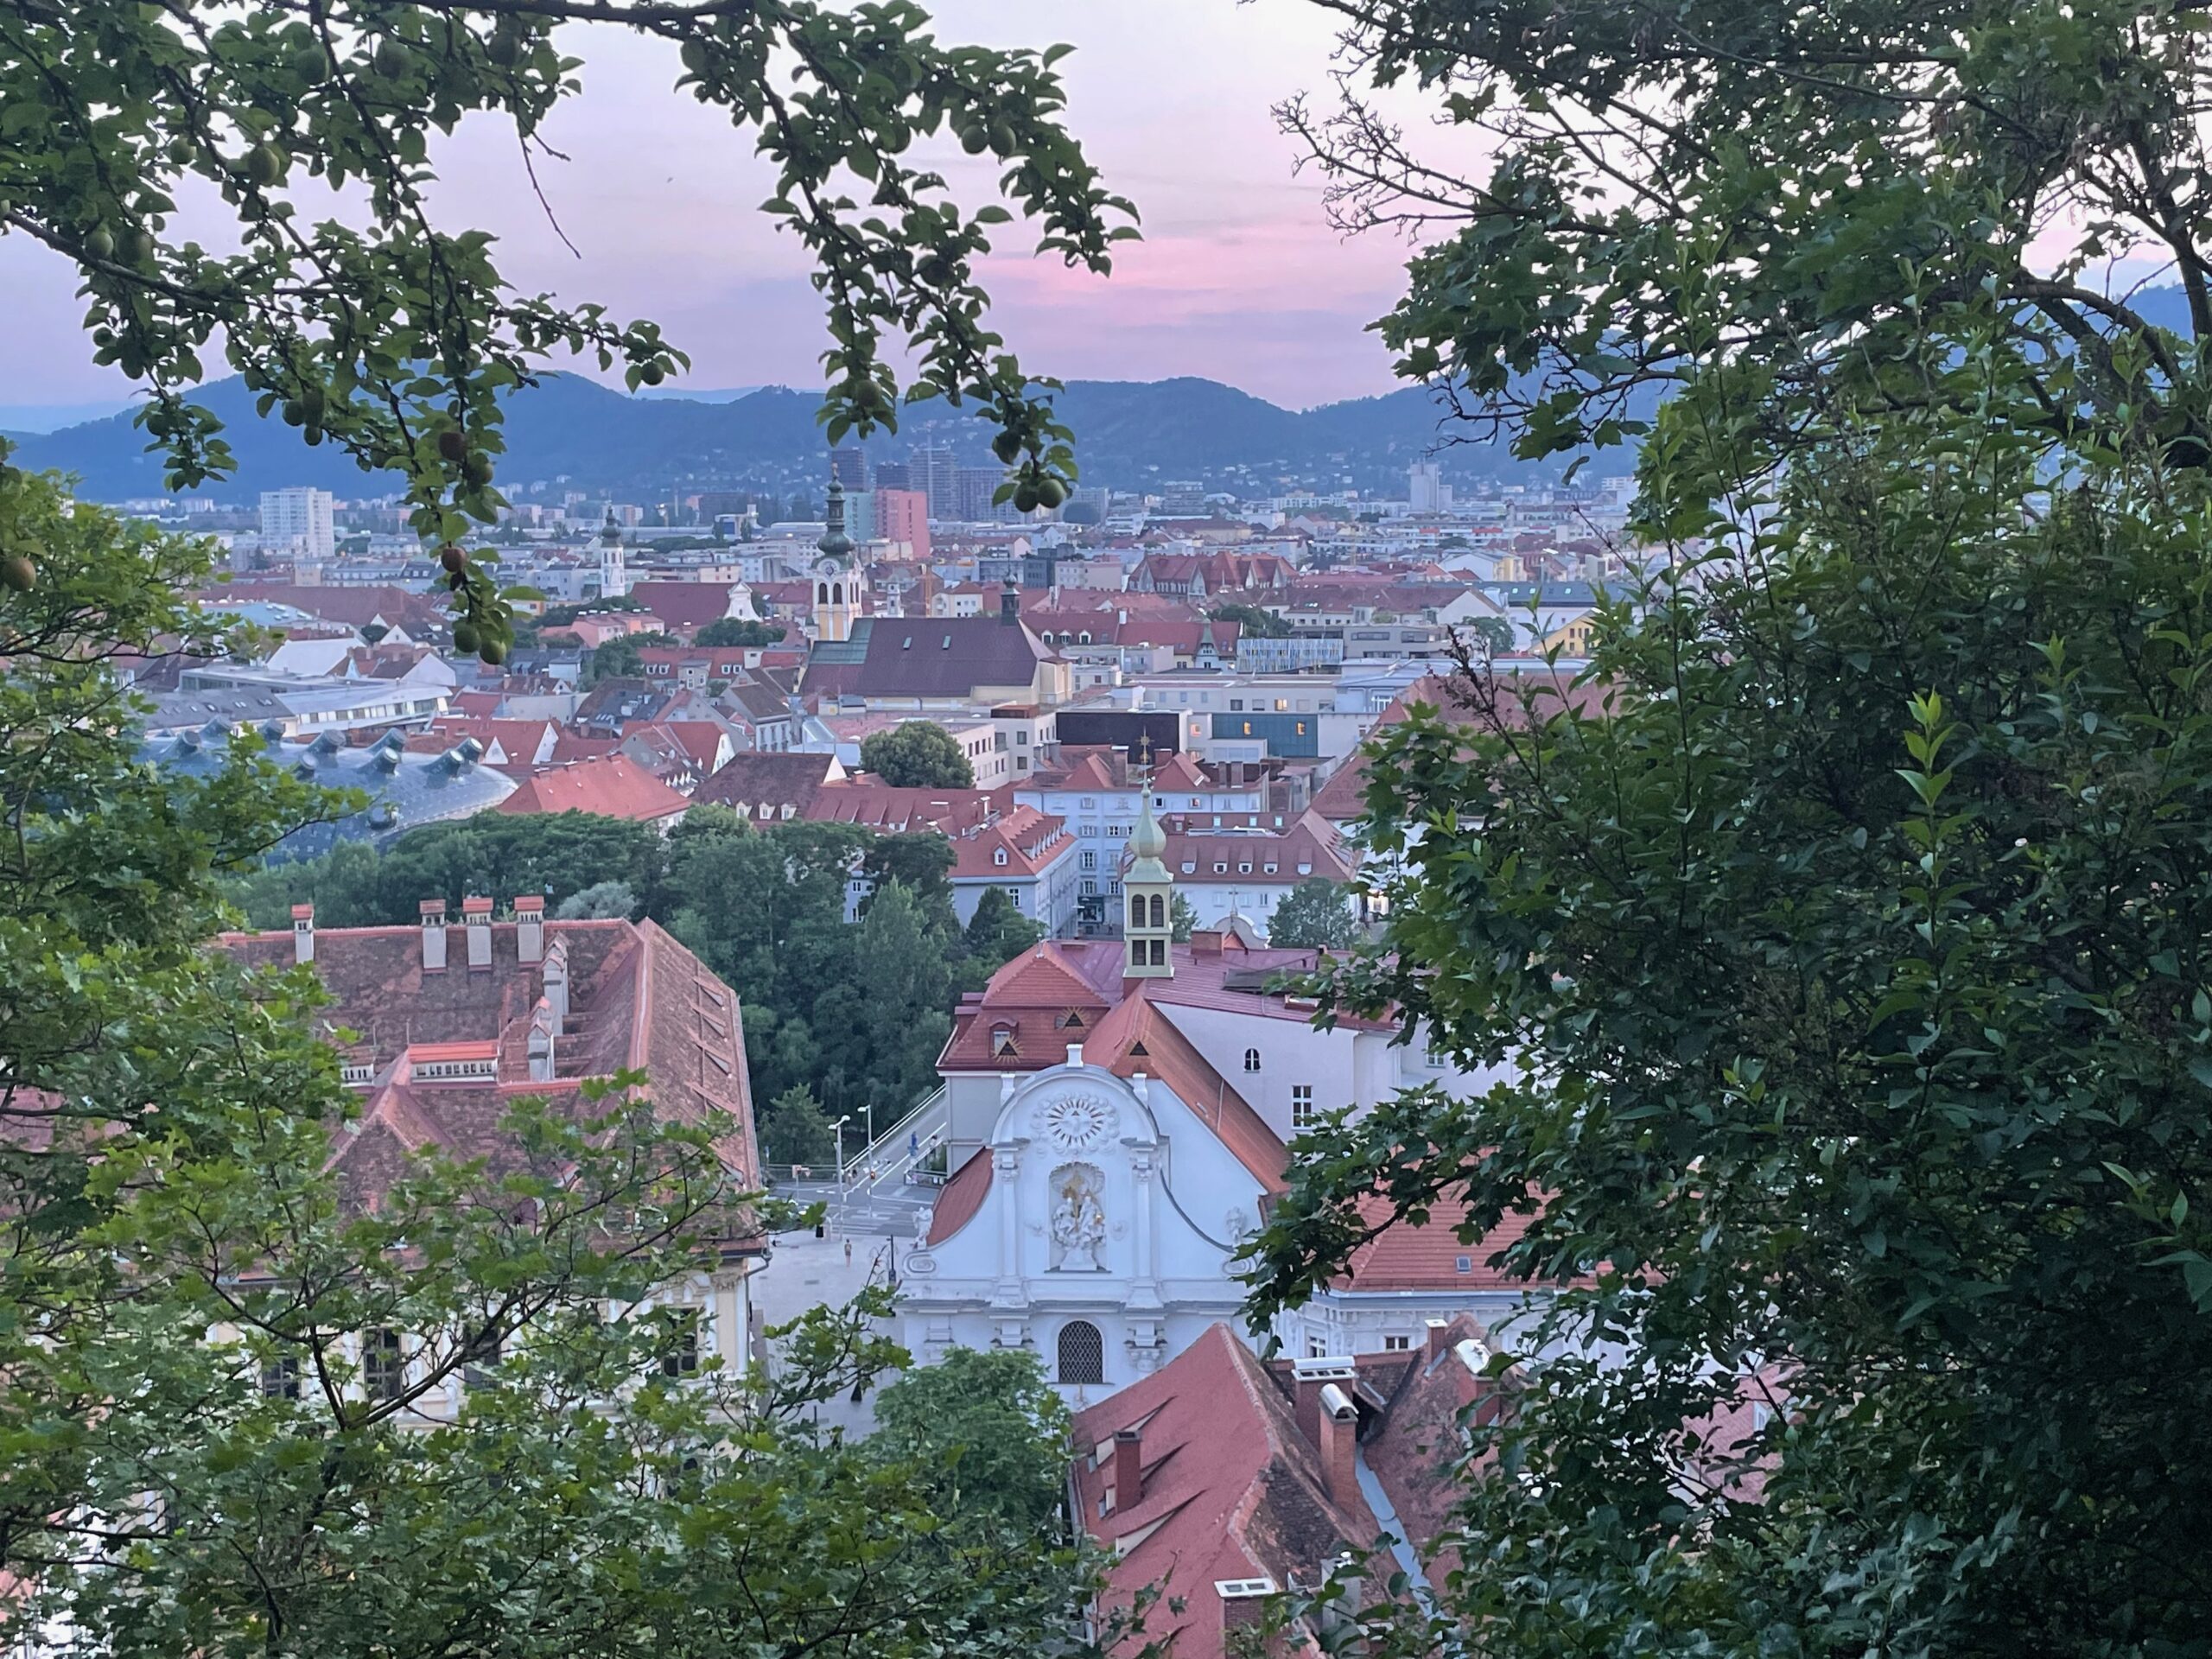 15 reasons to visit Graz. Experience the slow travel in Styria region.